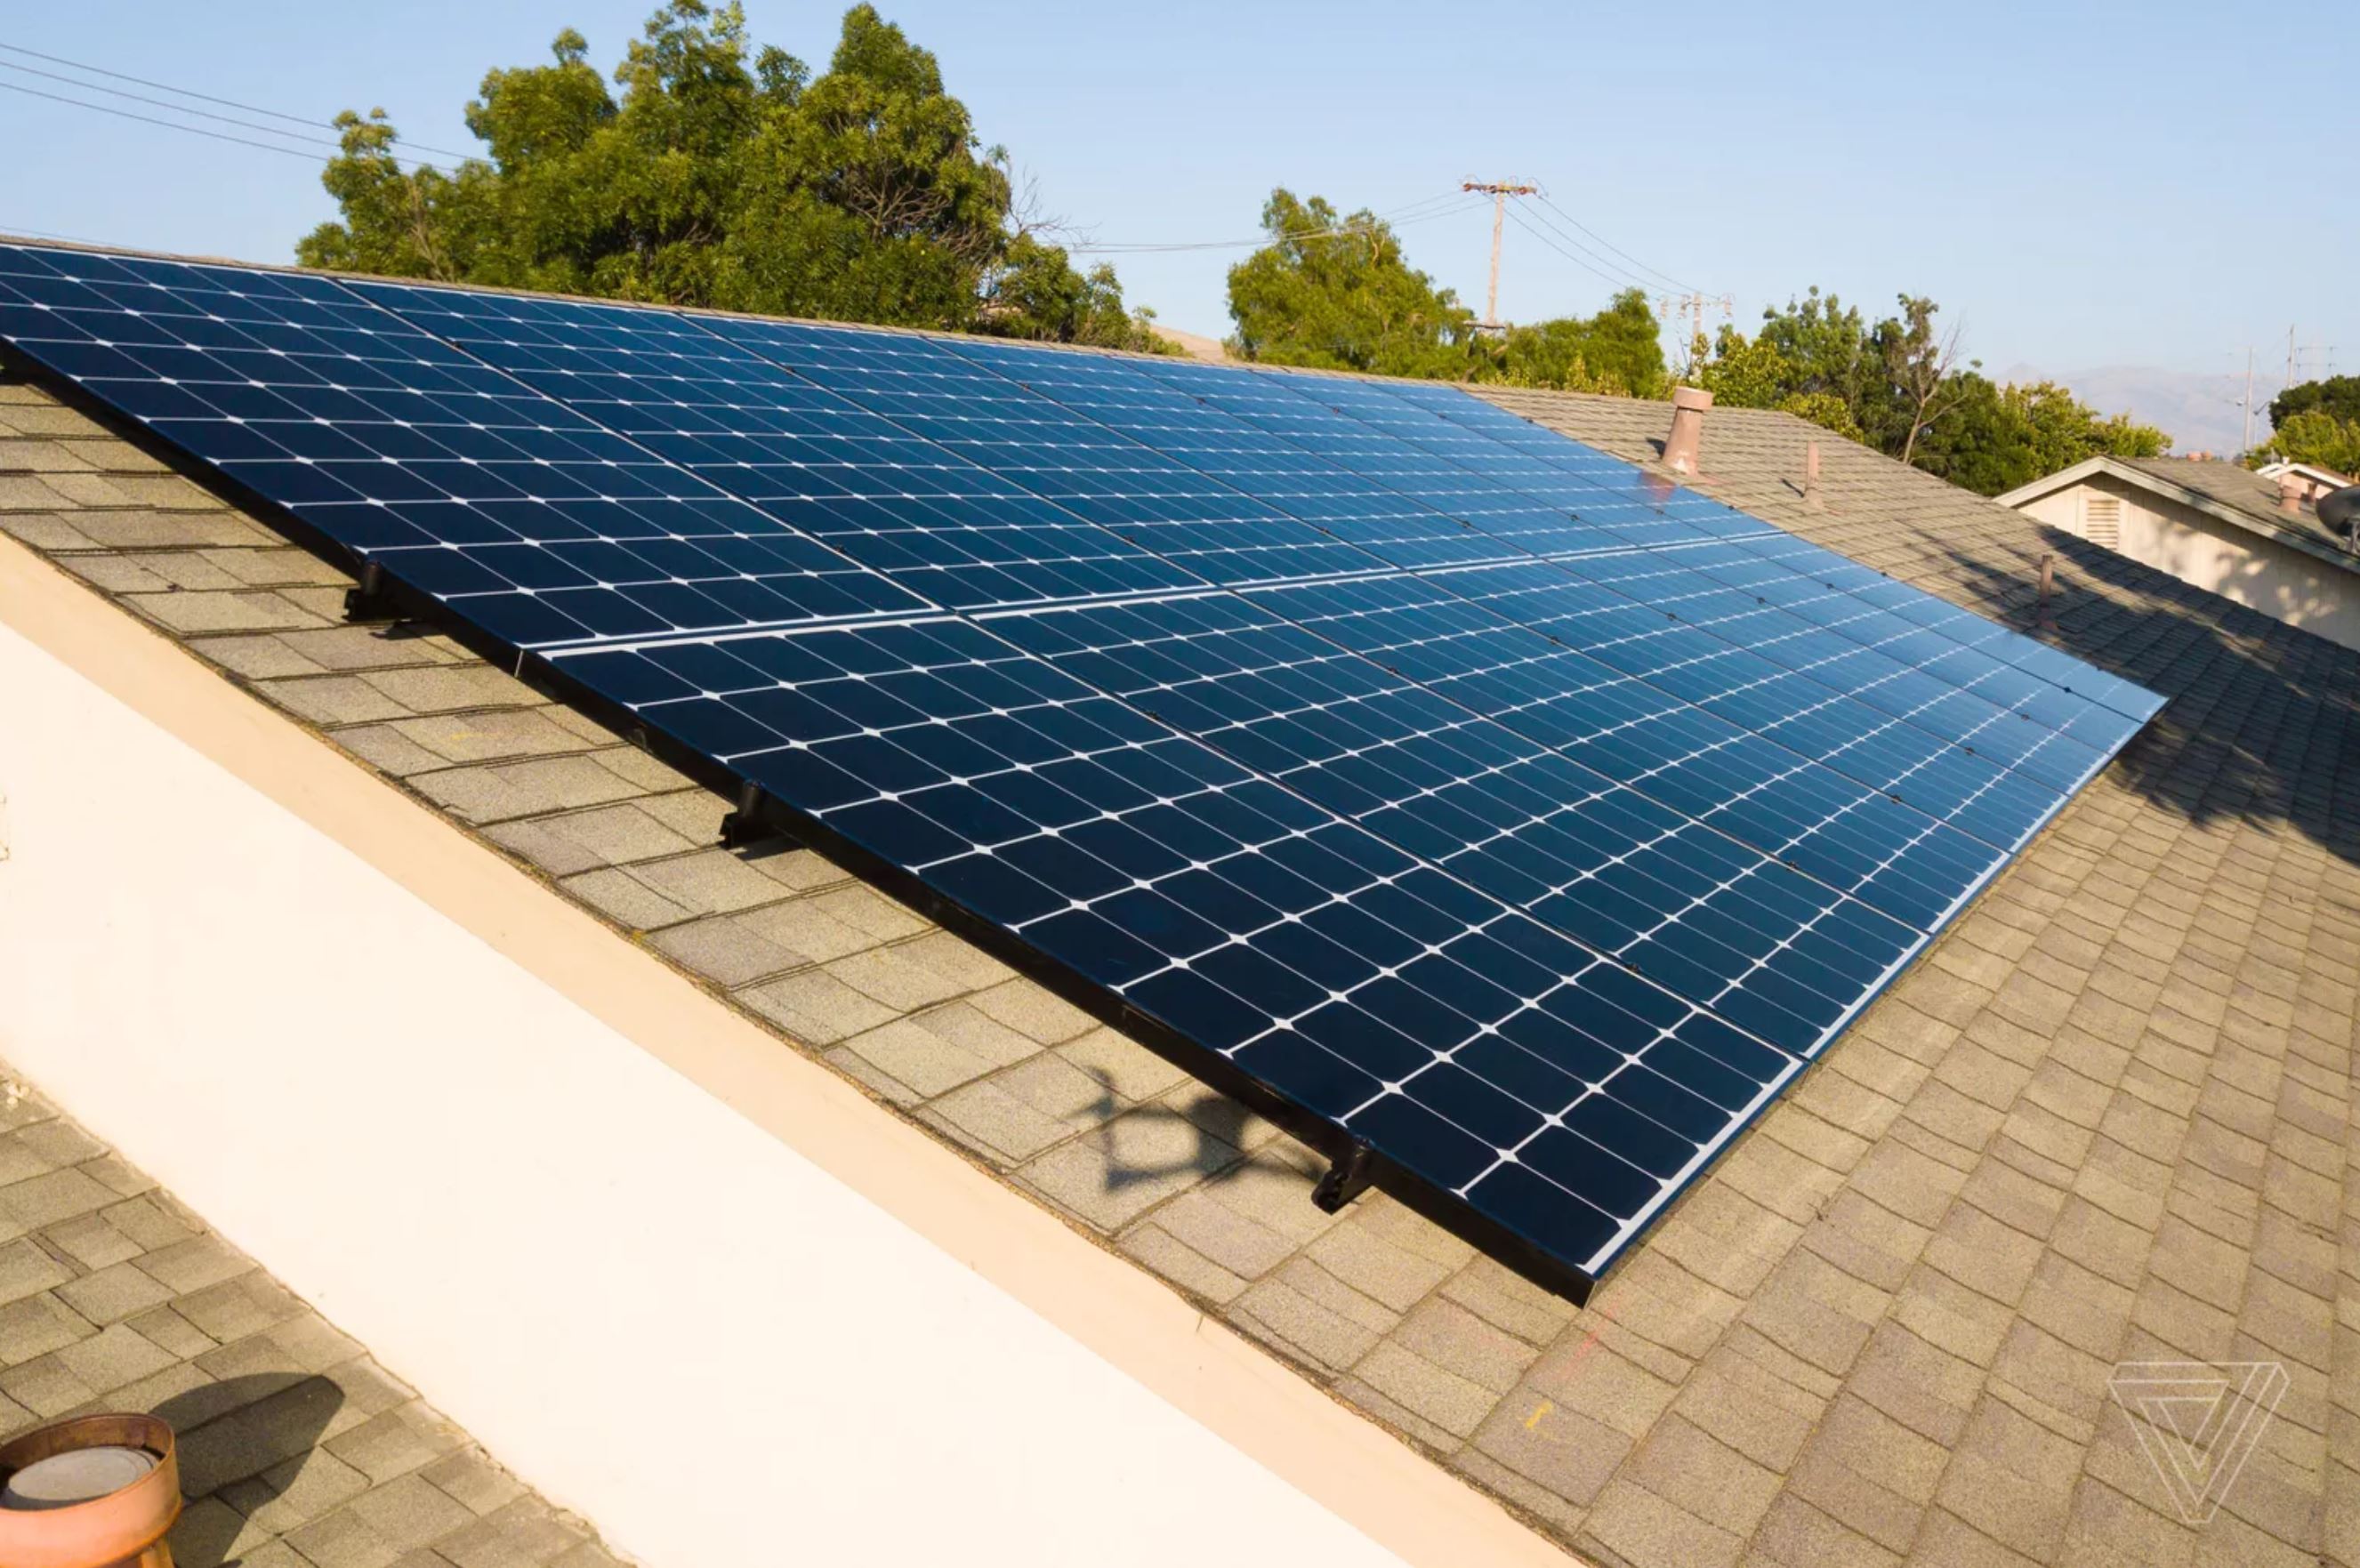 How Much Does a 3kW Solar Power System Cost?